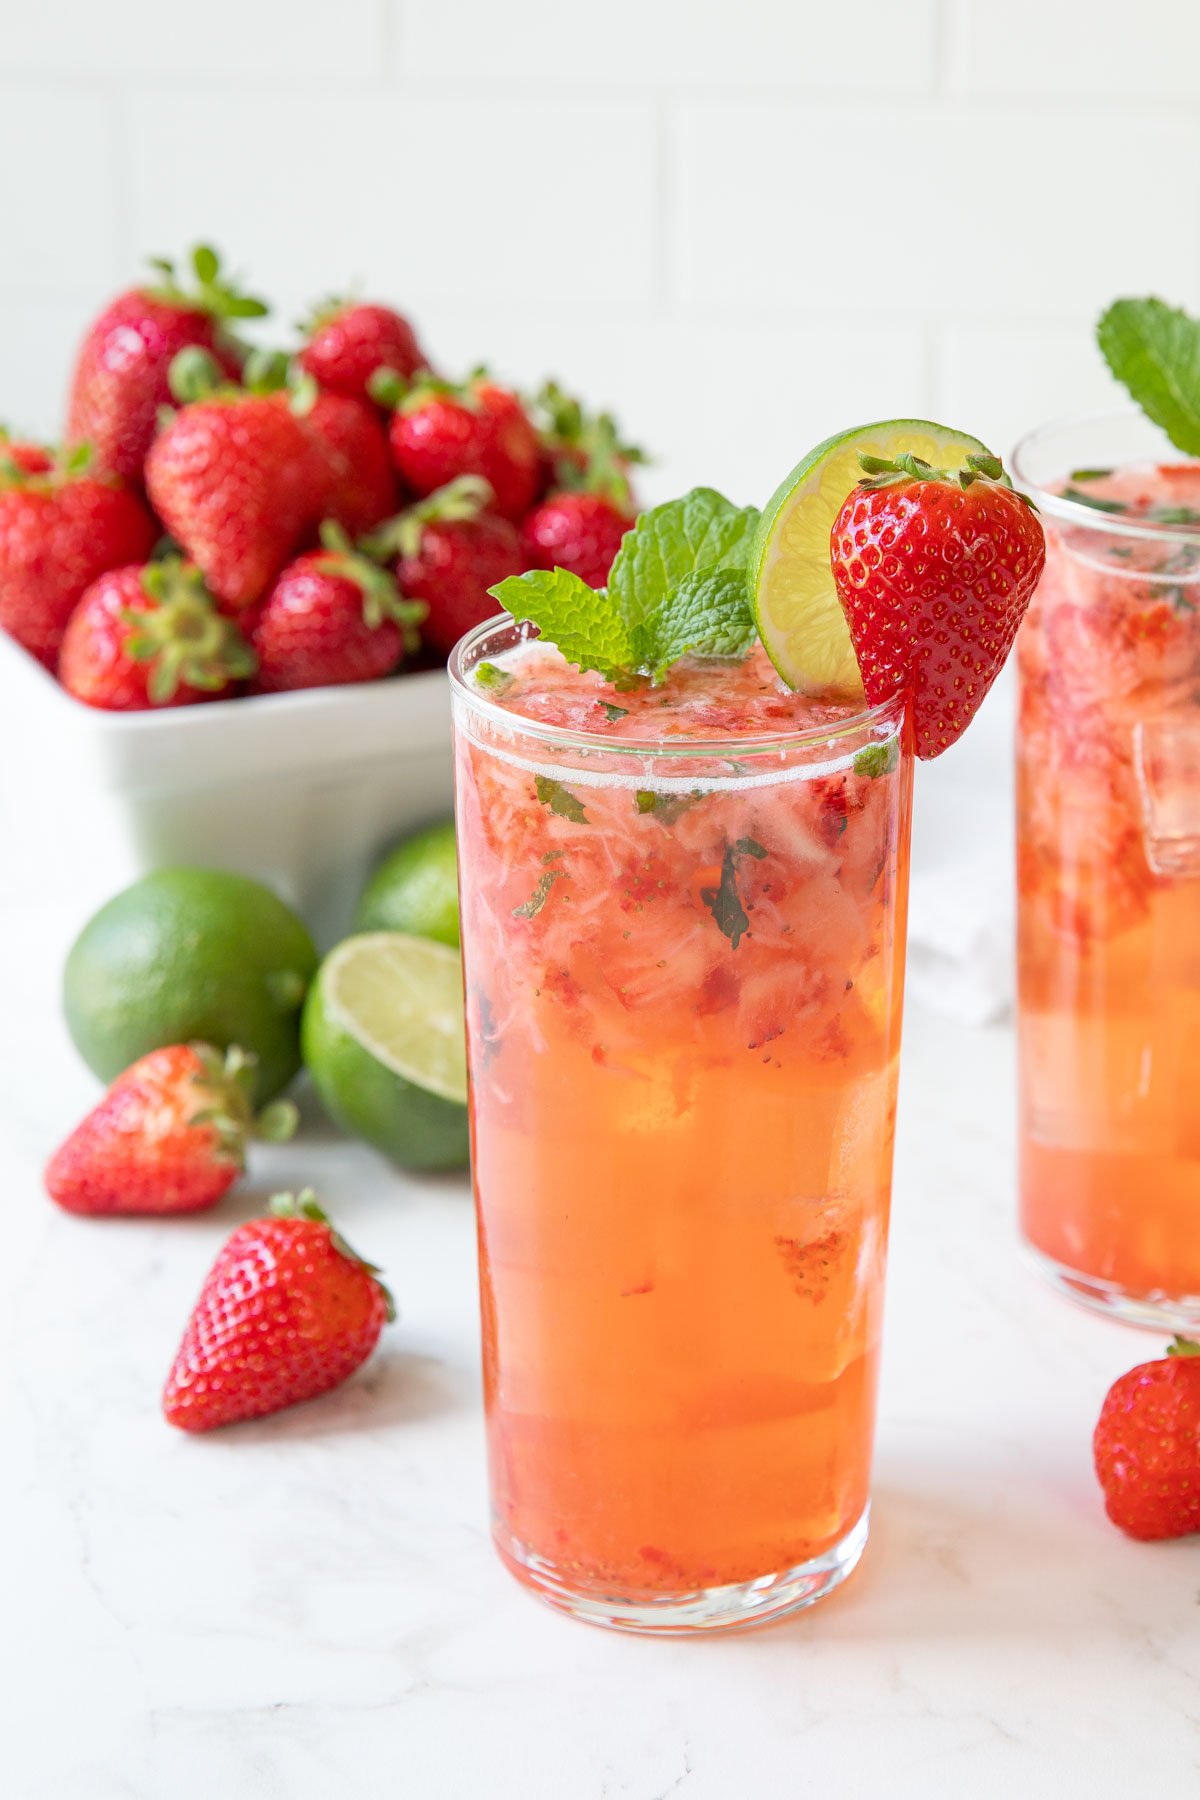 A strawberry mojito cocktail in a glass garnished with mint, a strawberry and lime wheel.